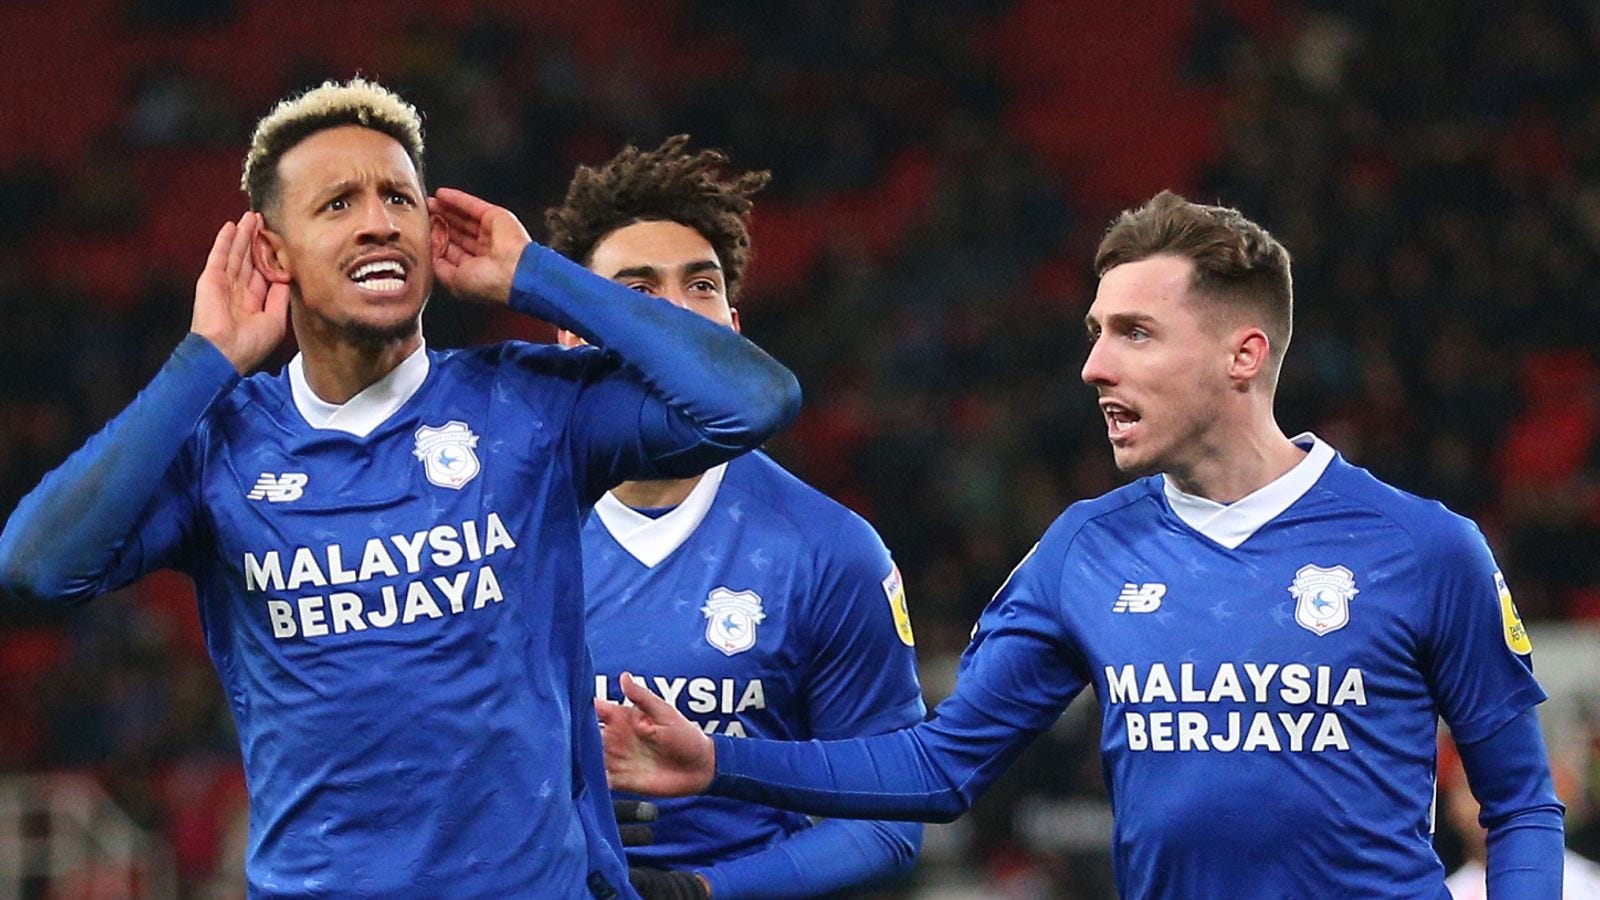 Cardiff City : Other Media